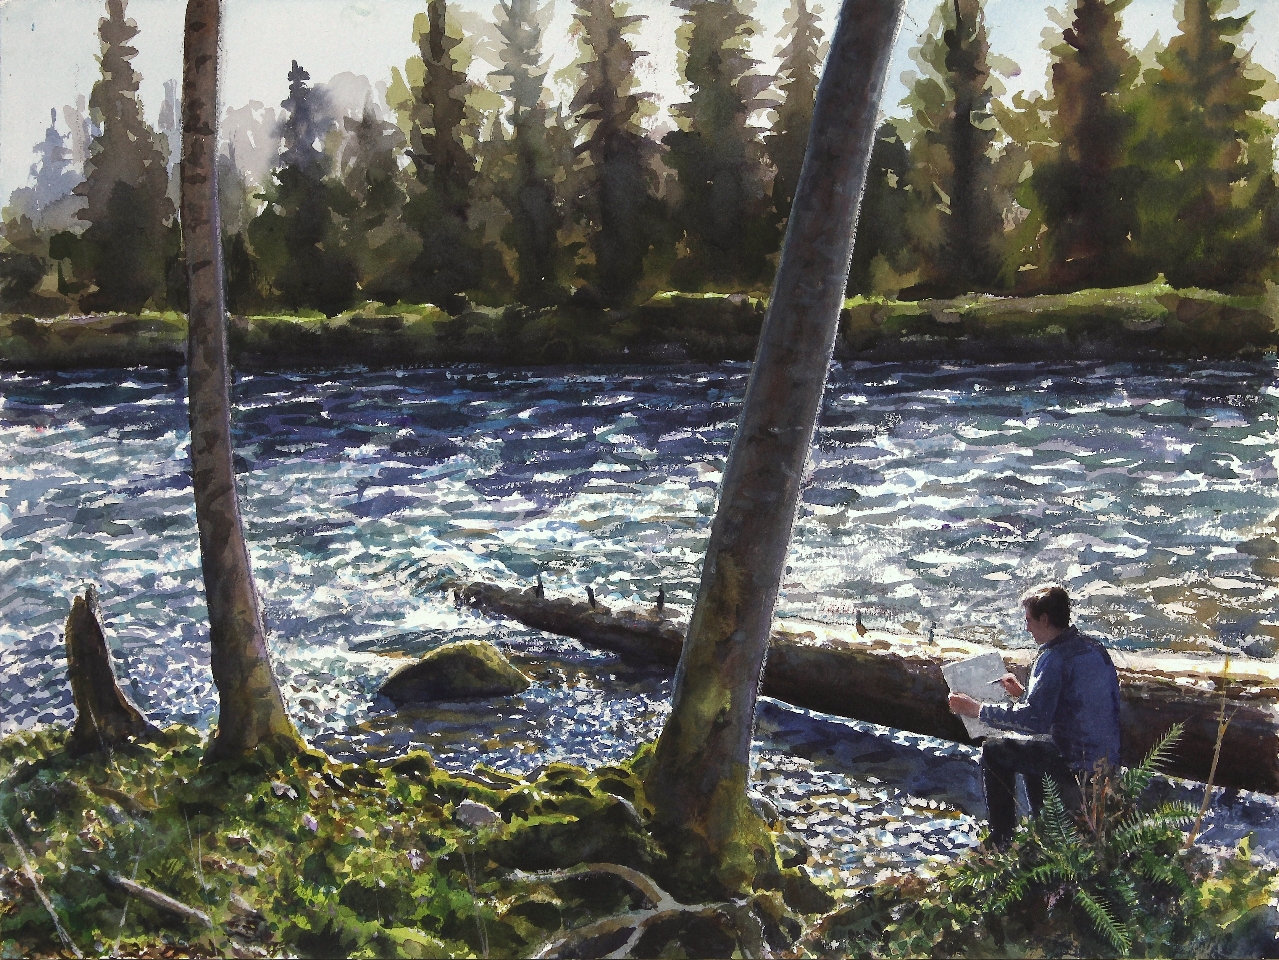 Tim Gardner

Artist Sketching by a River

2020

Watercolor on paper

12 x 16 inches (30.5 x 40.6 cm)

TG 582

INQUIRE